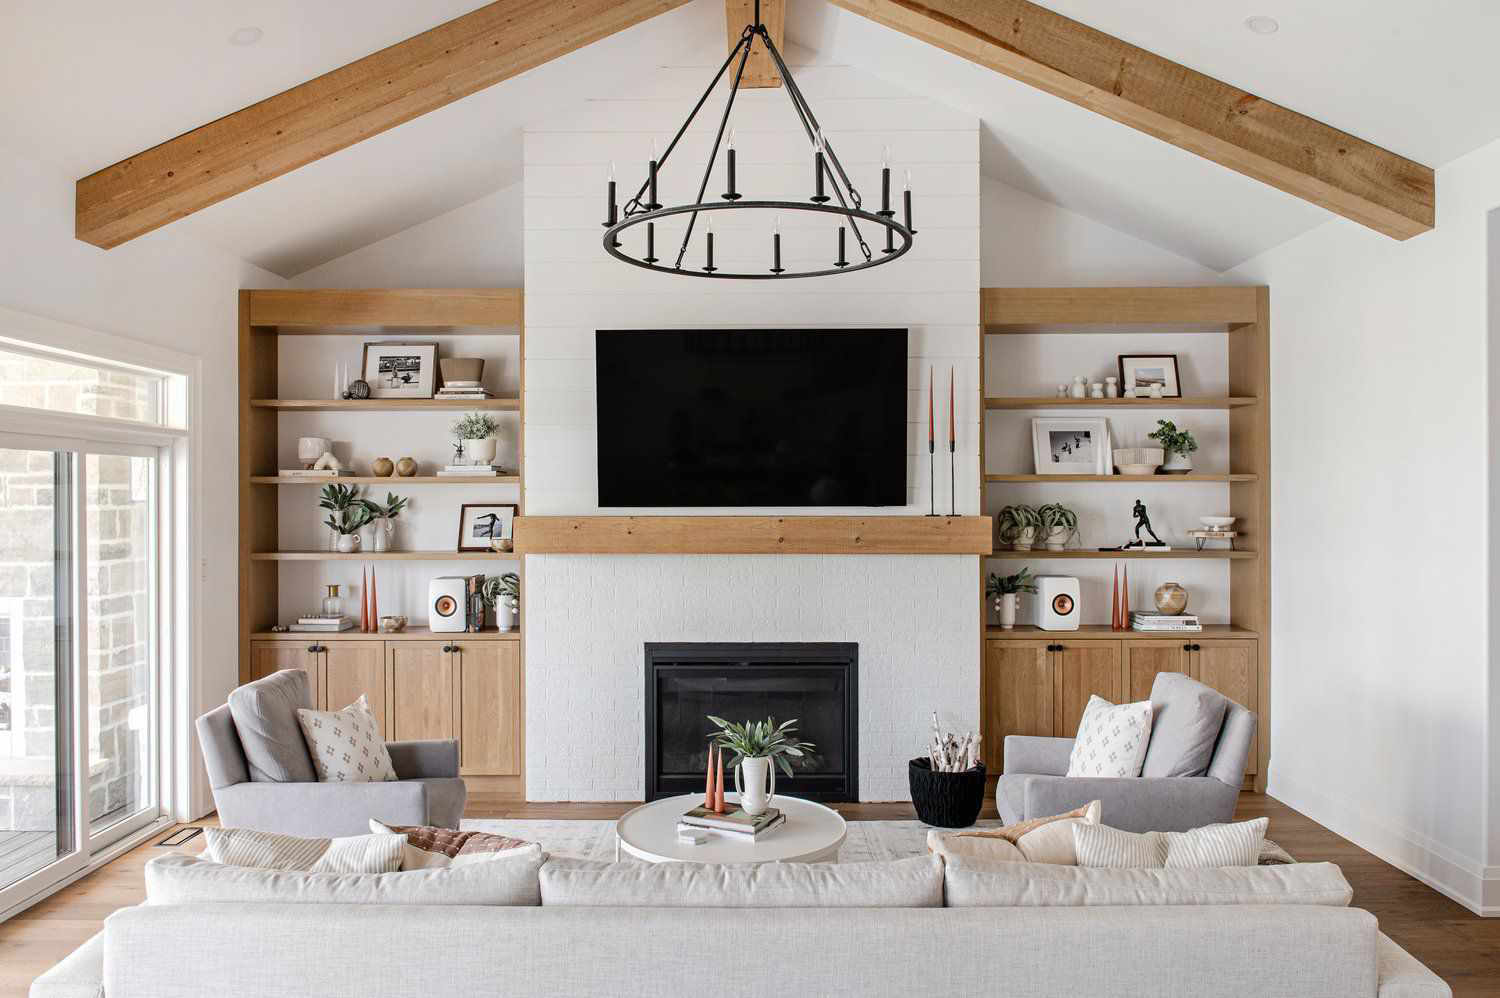 34 Fireplace Built-In Ideas to Add Extra Storage and Style to Your ...